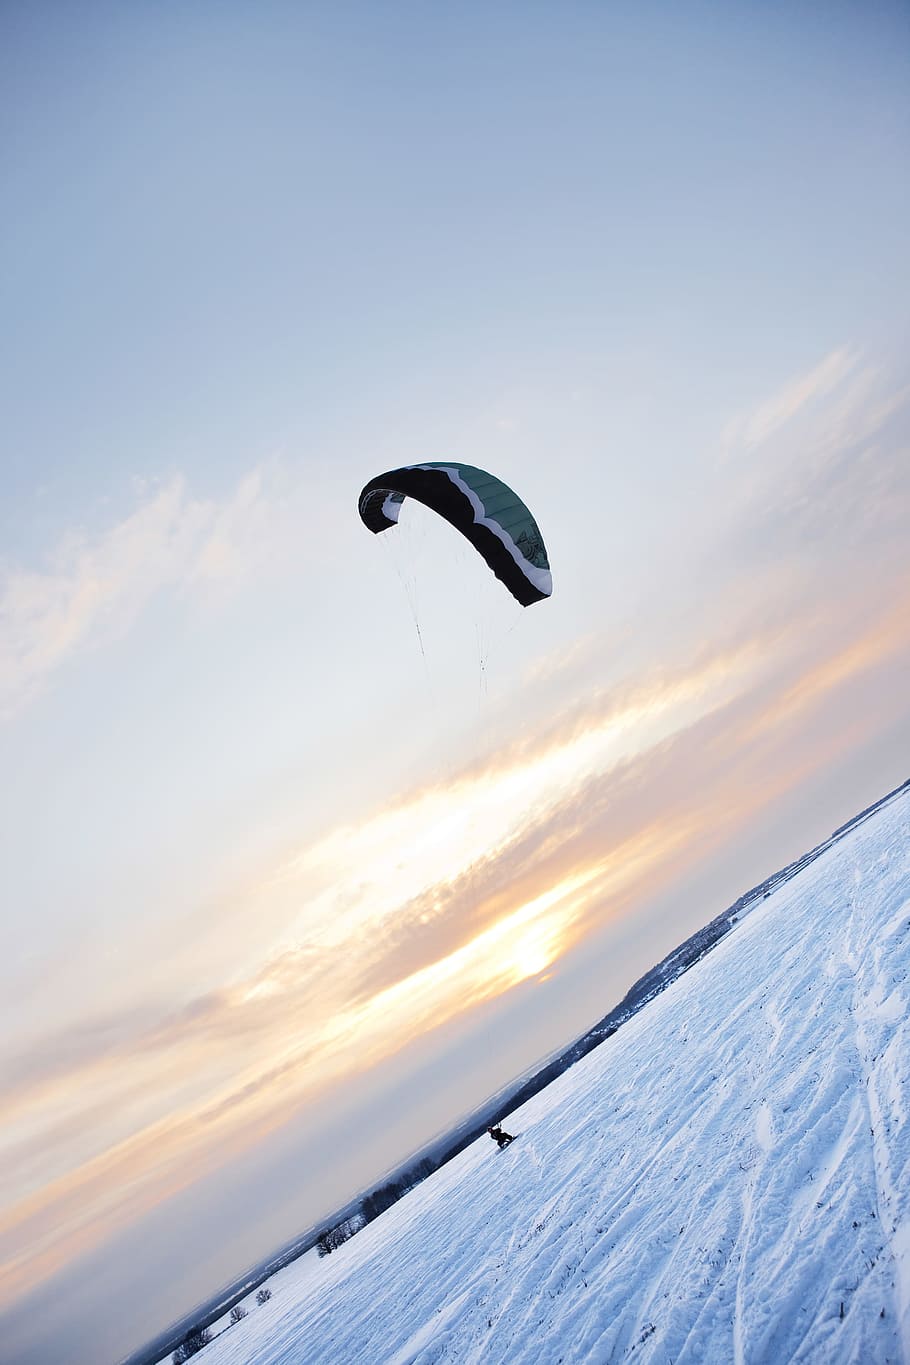 kite, kiting, snow, winter, outdoor, cold, windy, dom, para-plane, recreation